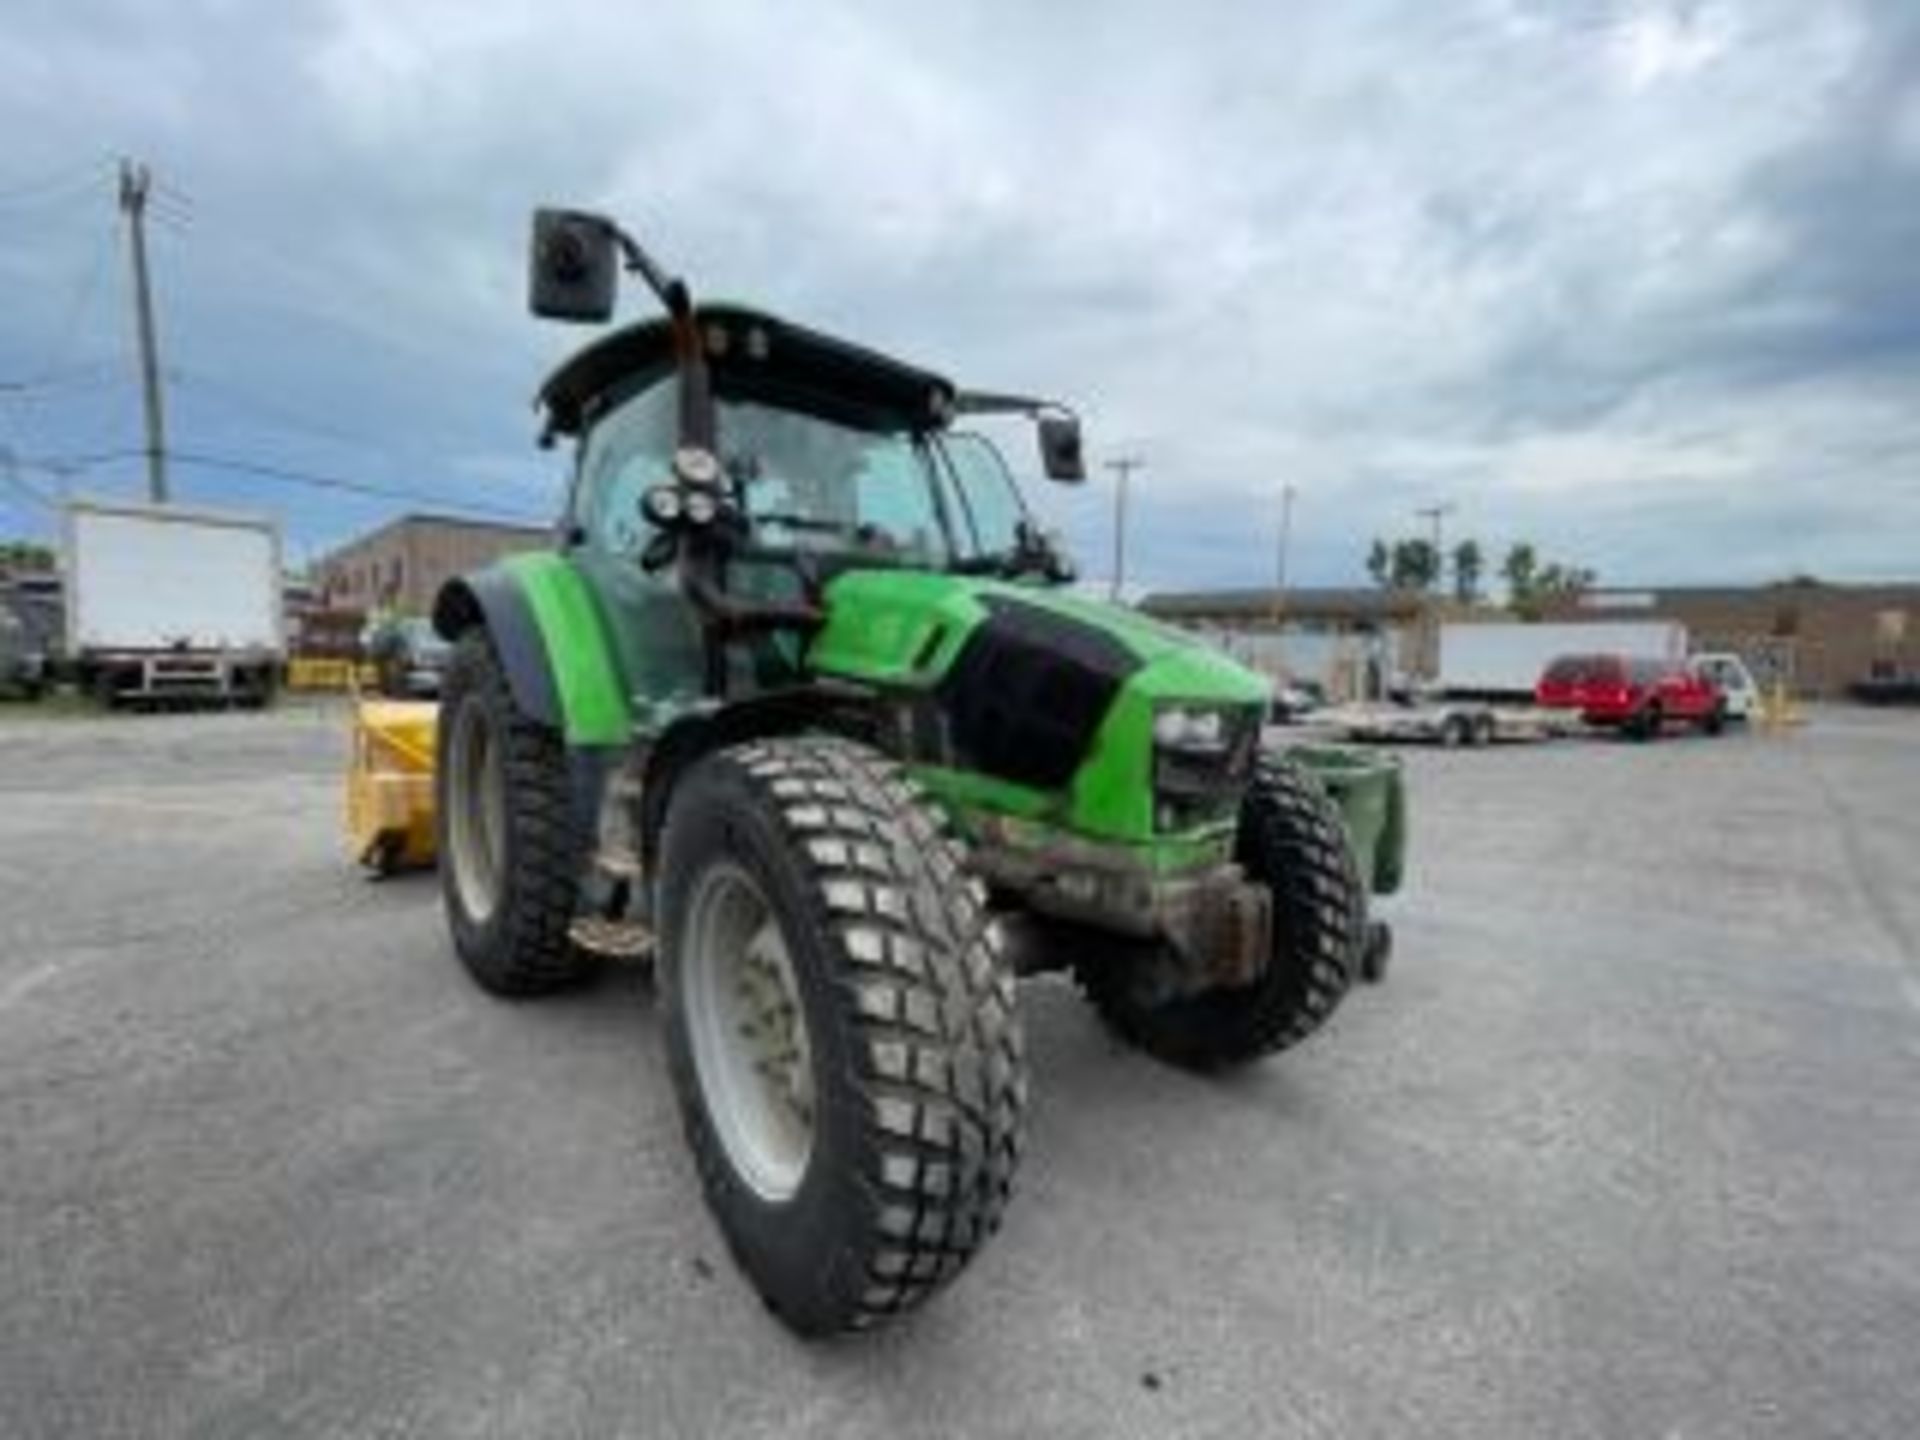 2018 DEUTZ-FAHR agricultural tractor # T51-10003 With PRONOVOST snow removal attachment 1109.8 Hours - Image 6 of 27